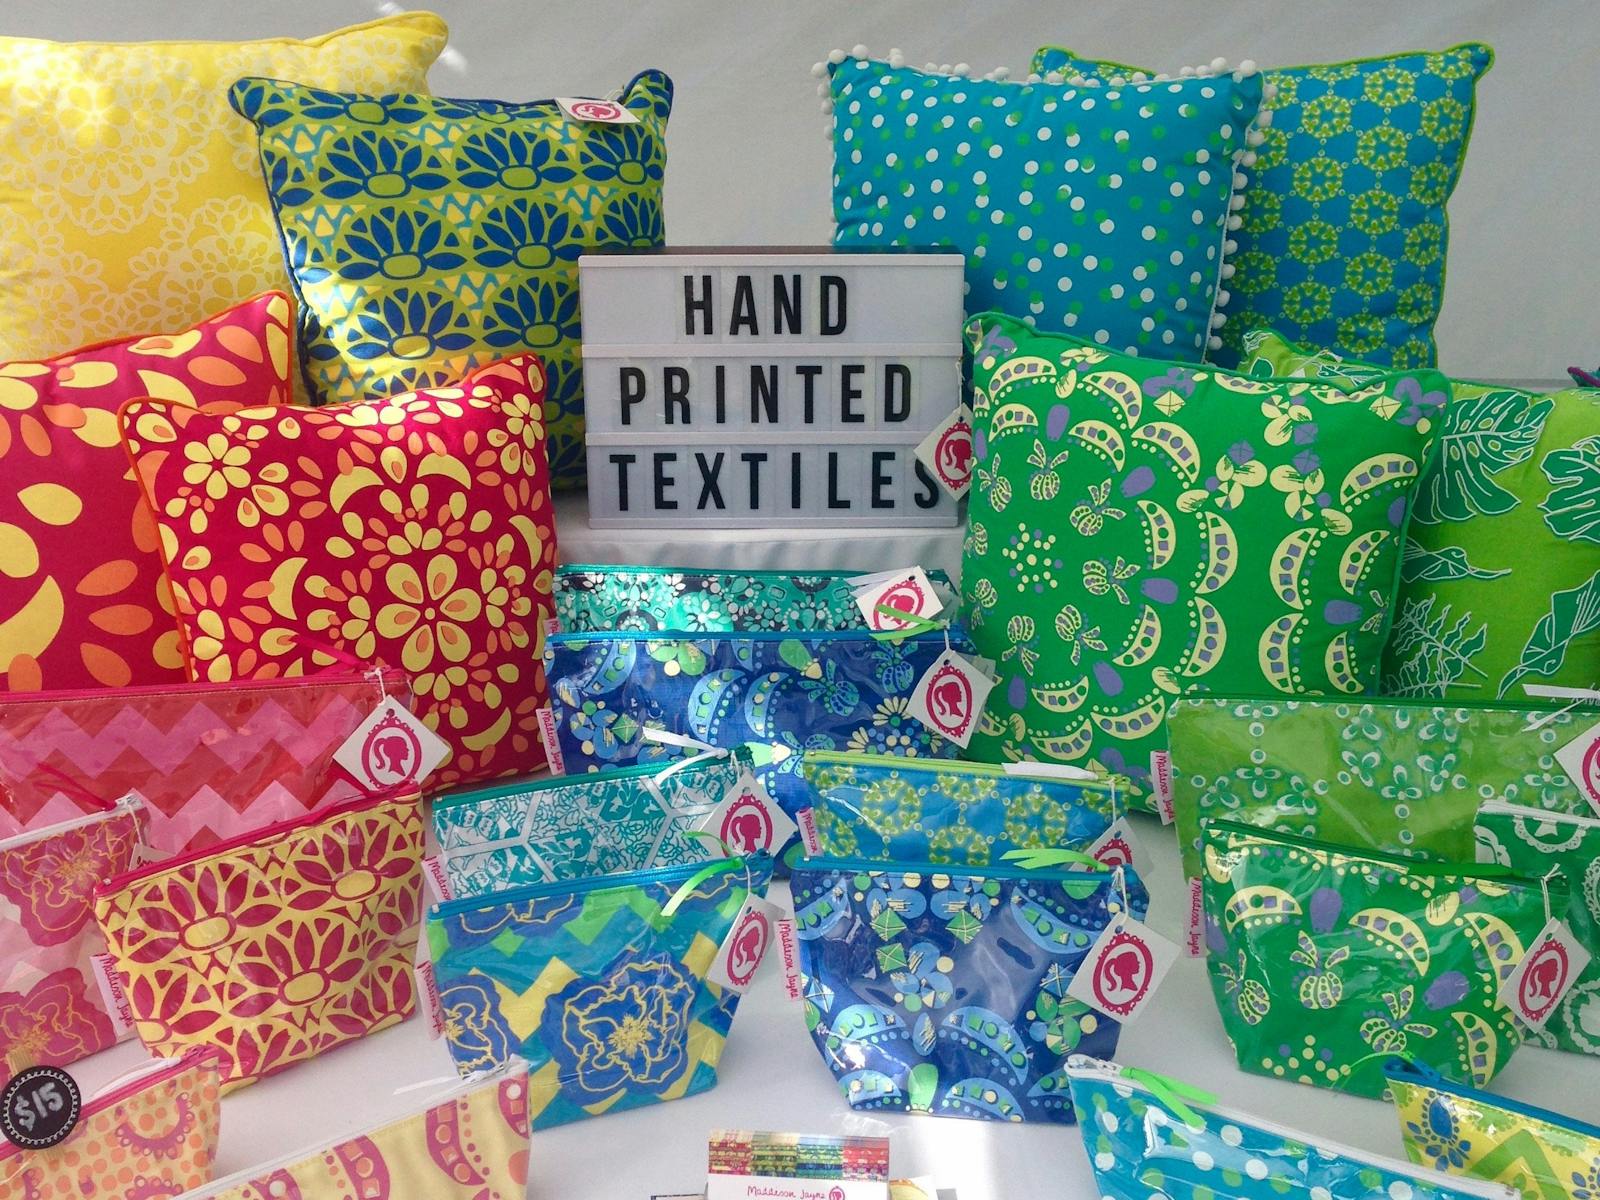 Hand Printed Textiles